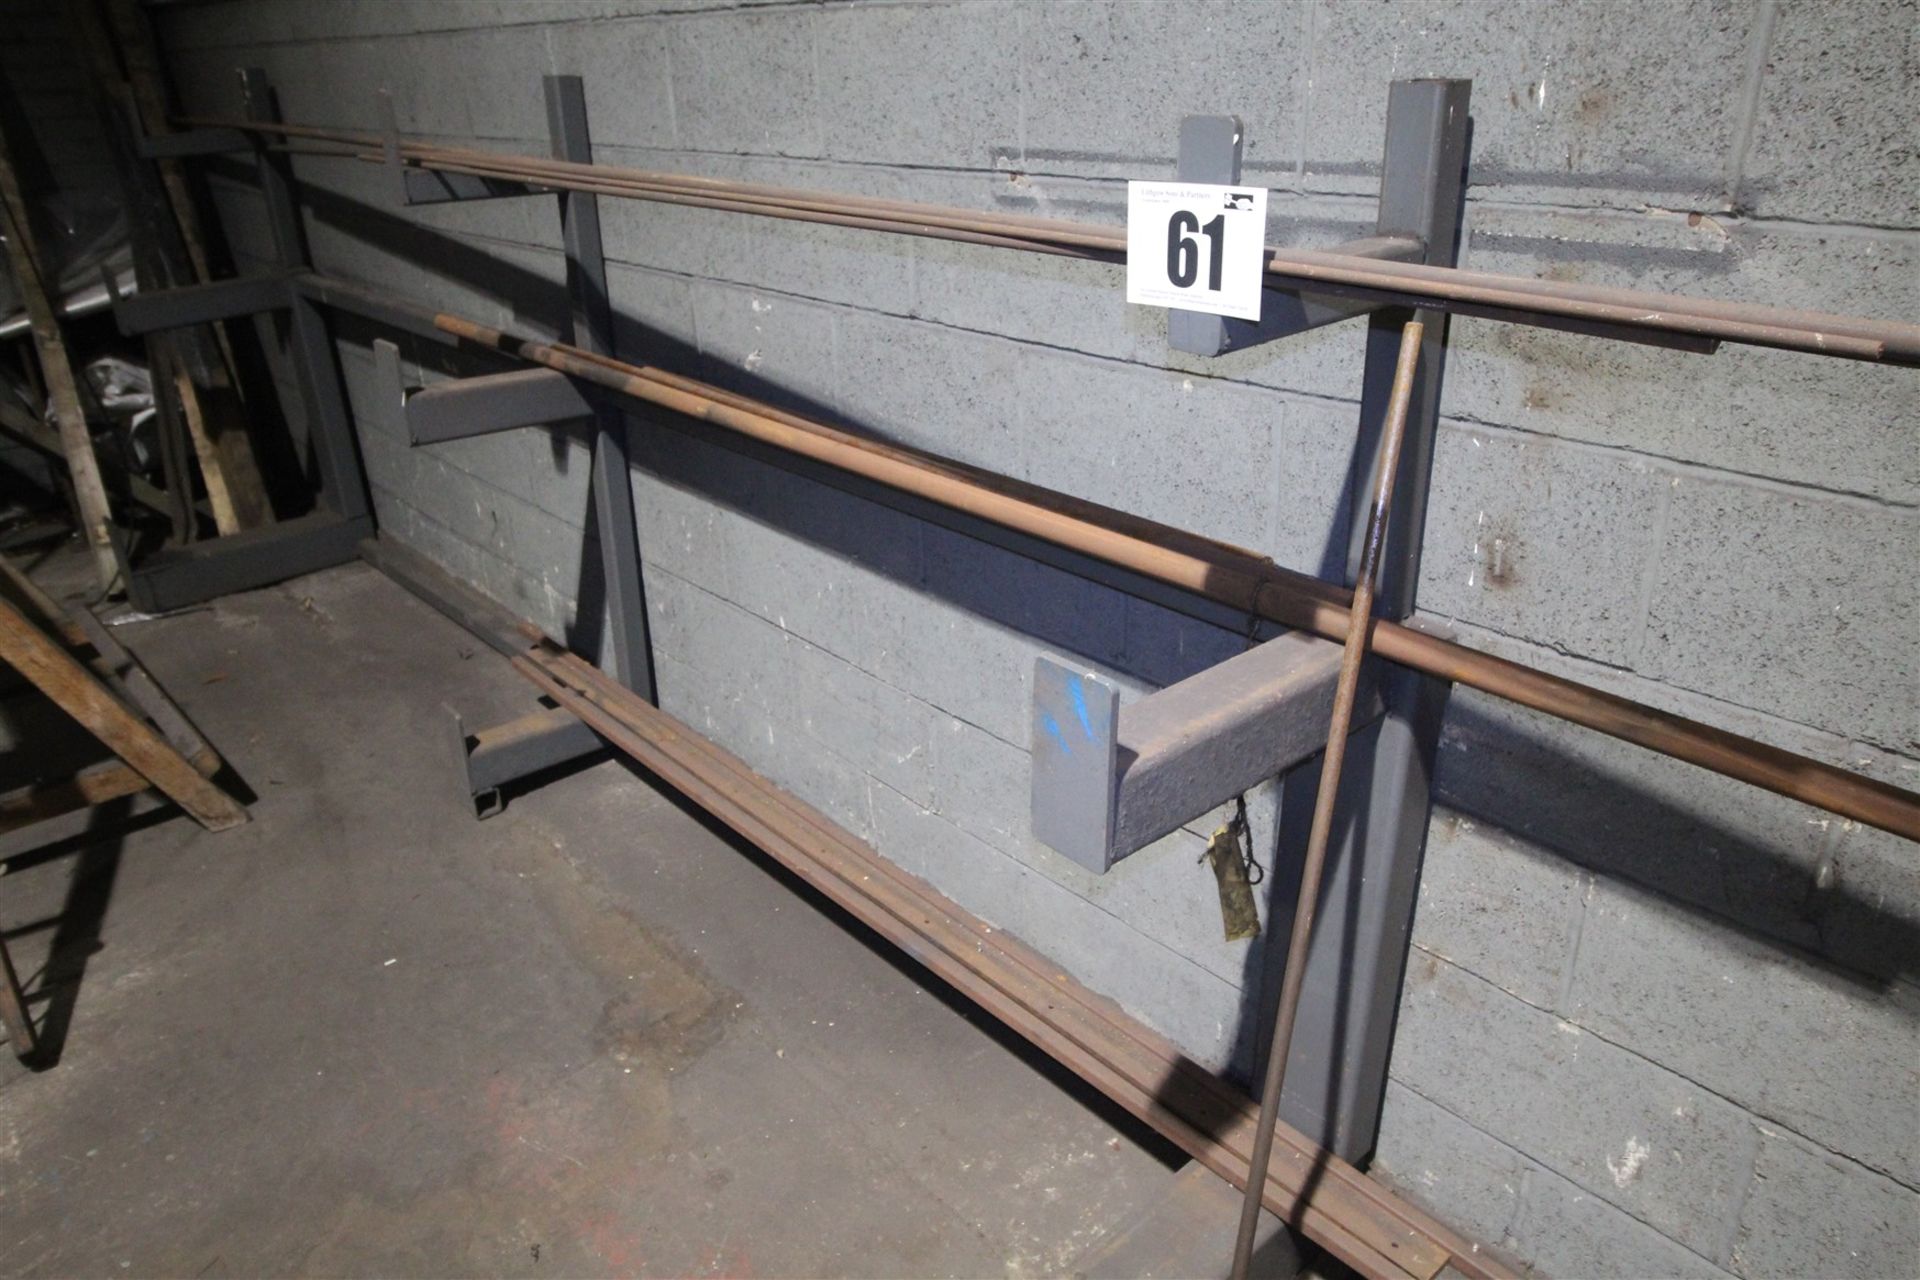 GREY PAINTED METAL, 3-HEIGHT STEEL STOCK RACK & CONTENTS OF STEEL STOCK INC. ROUND BAR & BOX